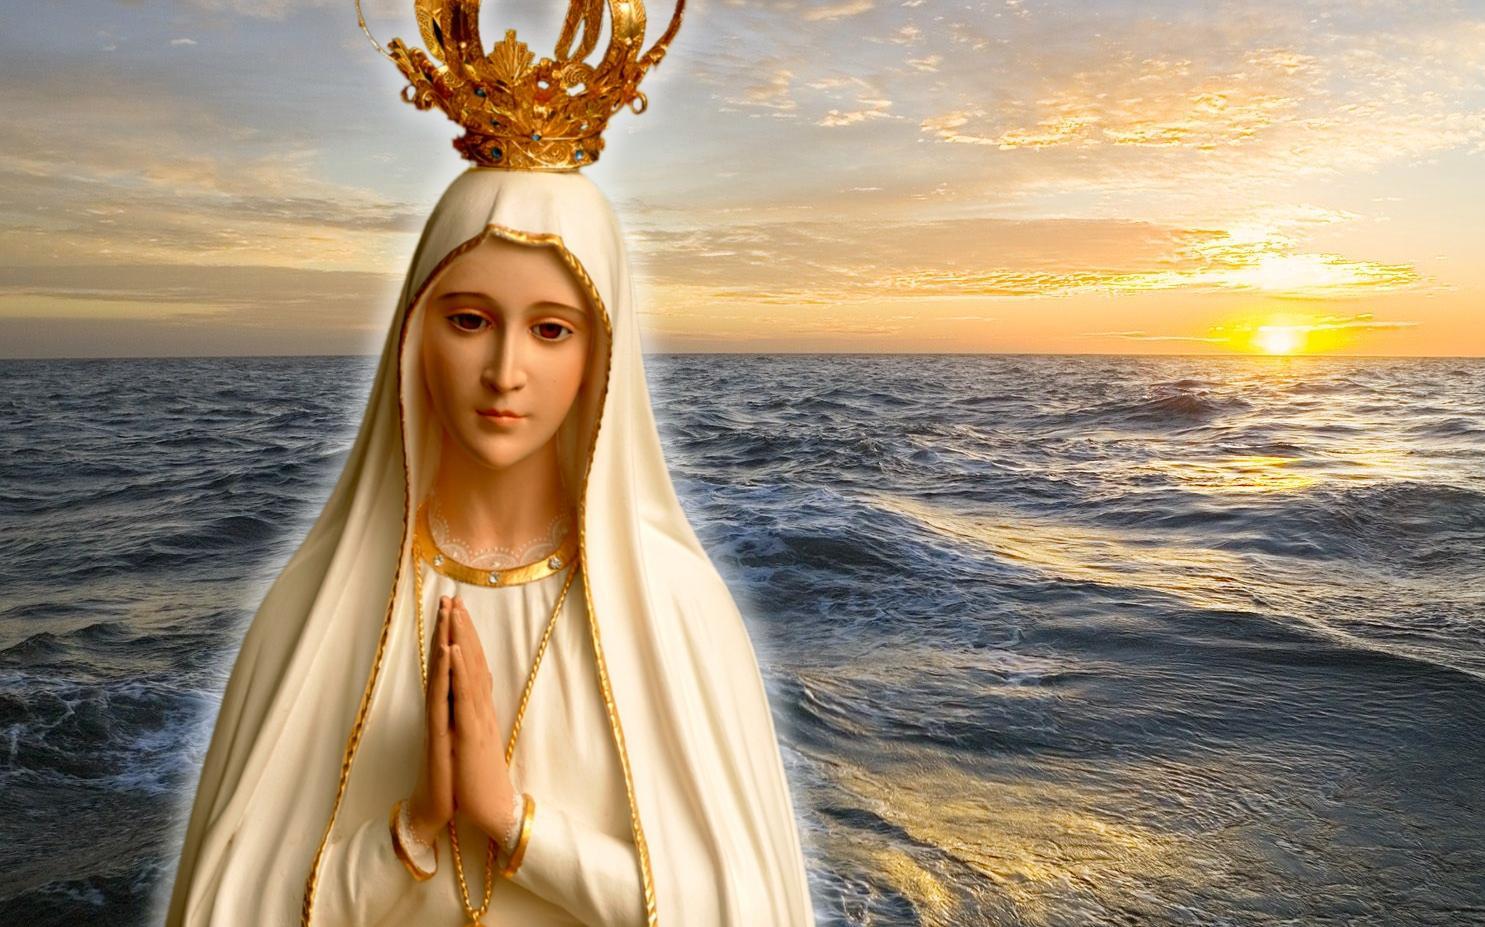 Mother Mary Wallpaper Free Download , Find HD Wallpaper For Free